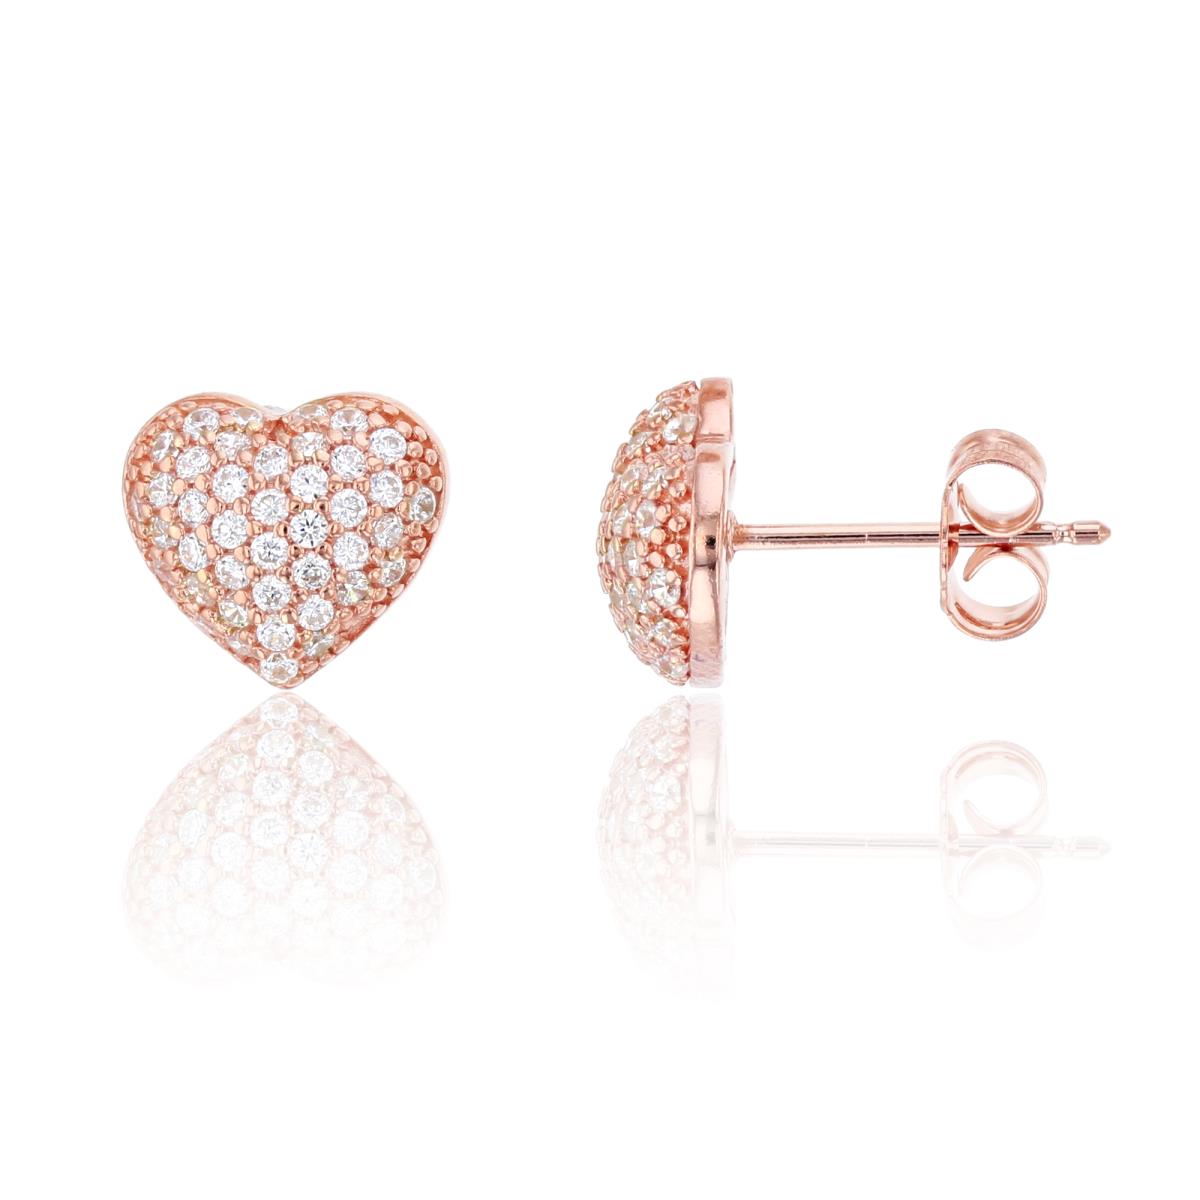 Sterling Silver Rose 10mm Micropave Puffed Heart Stud